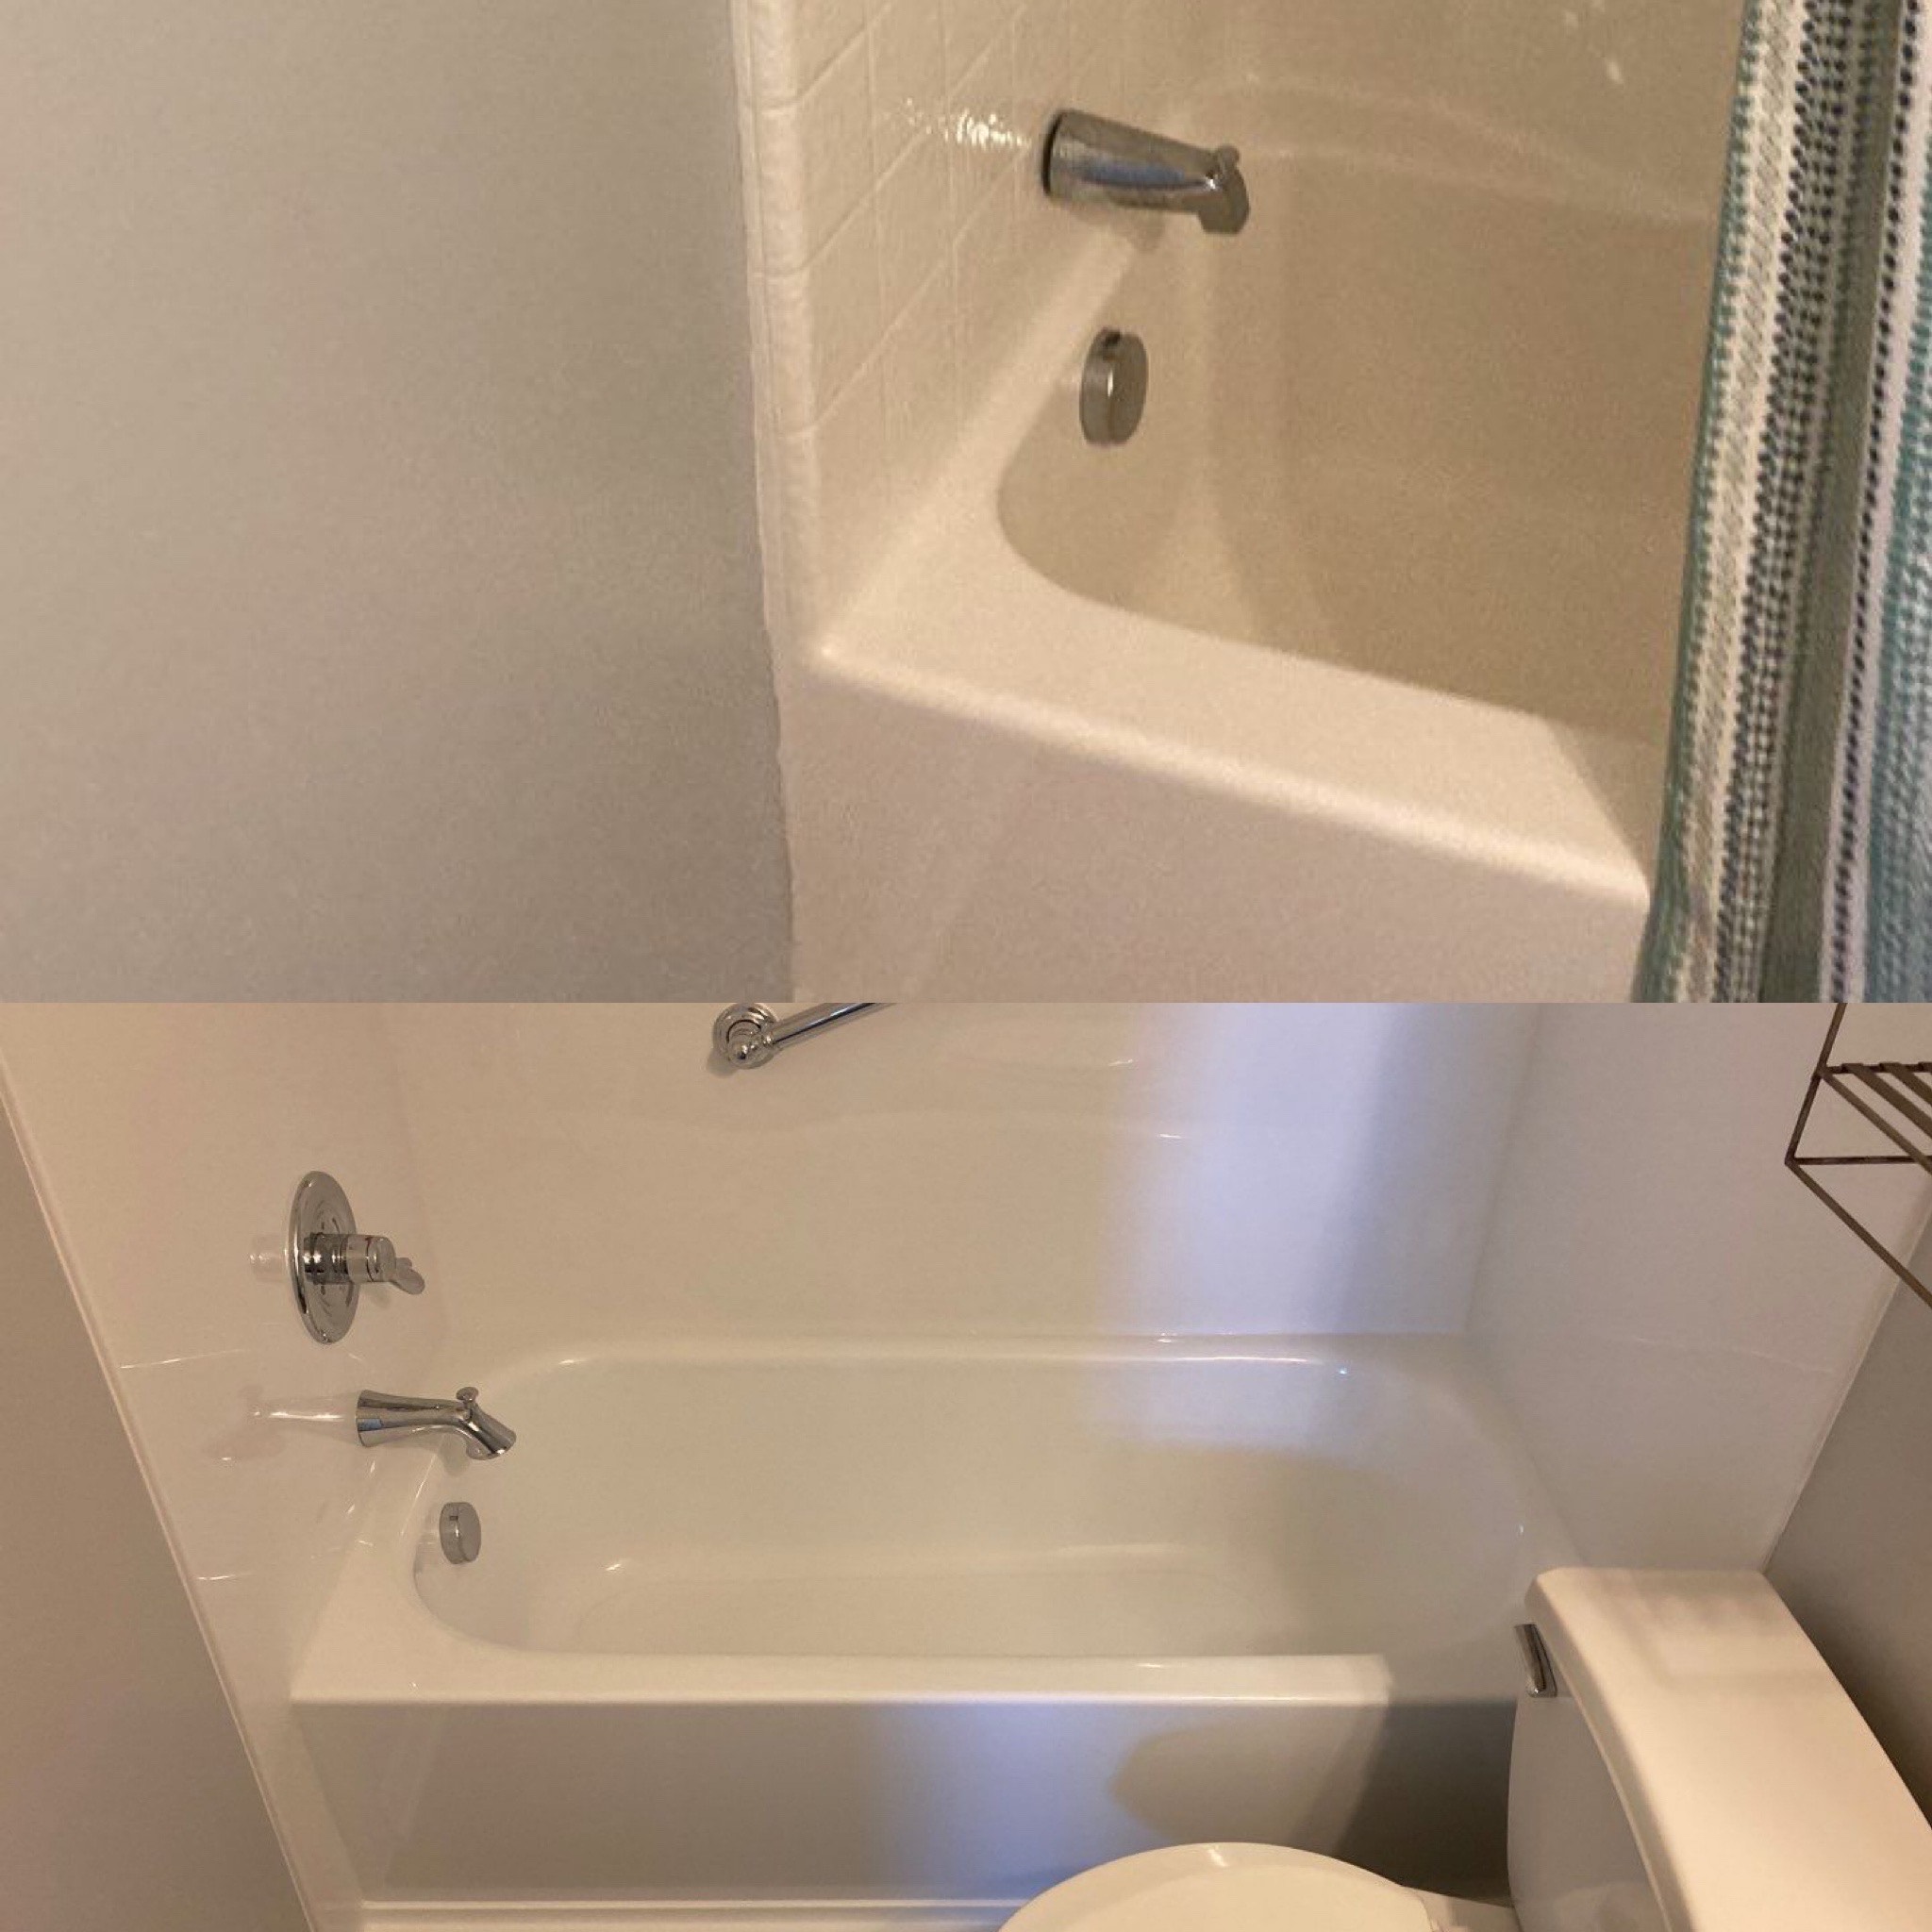 Before and After Tub/Shower Combo